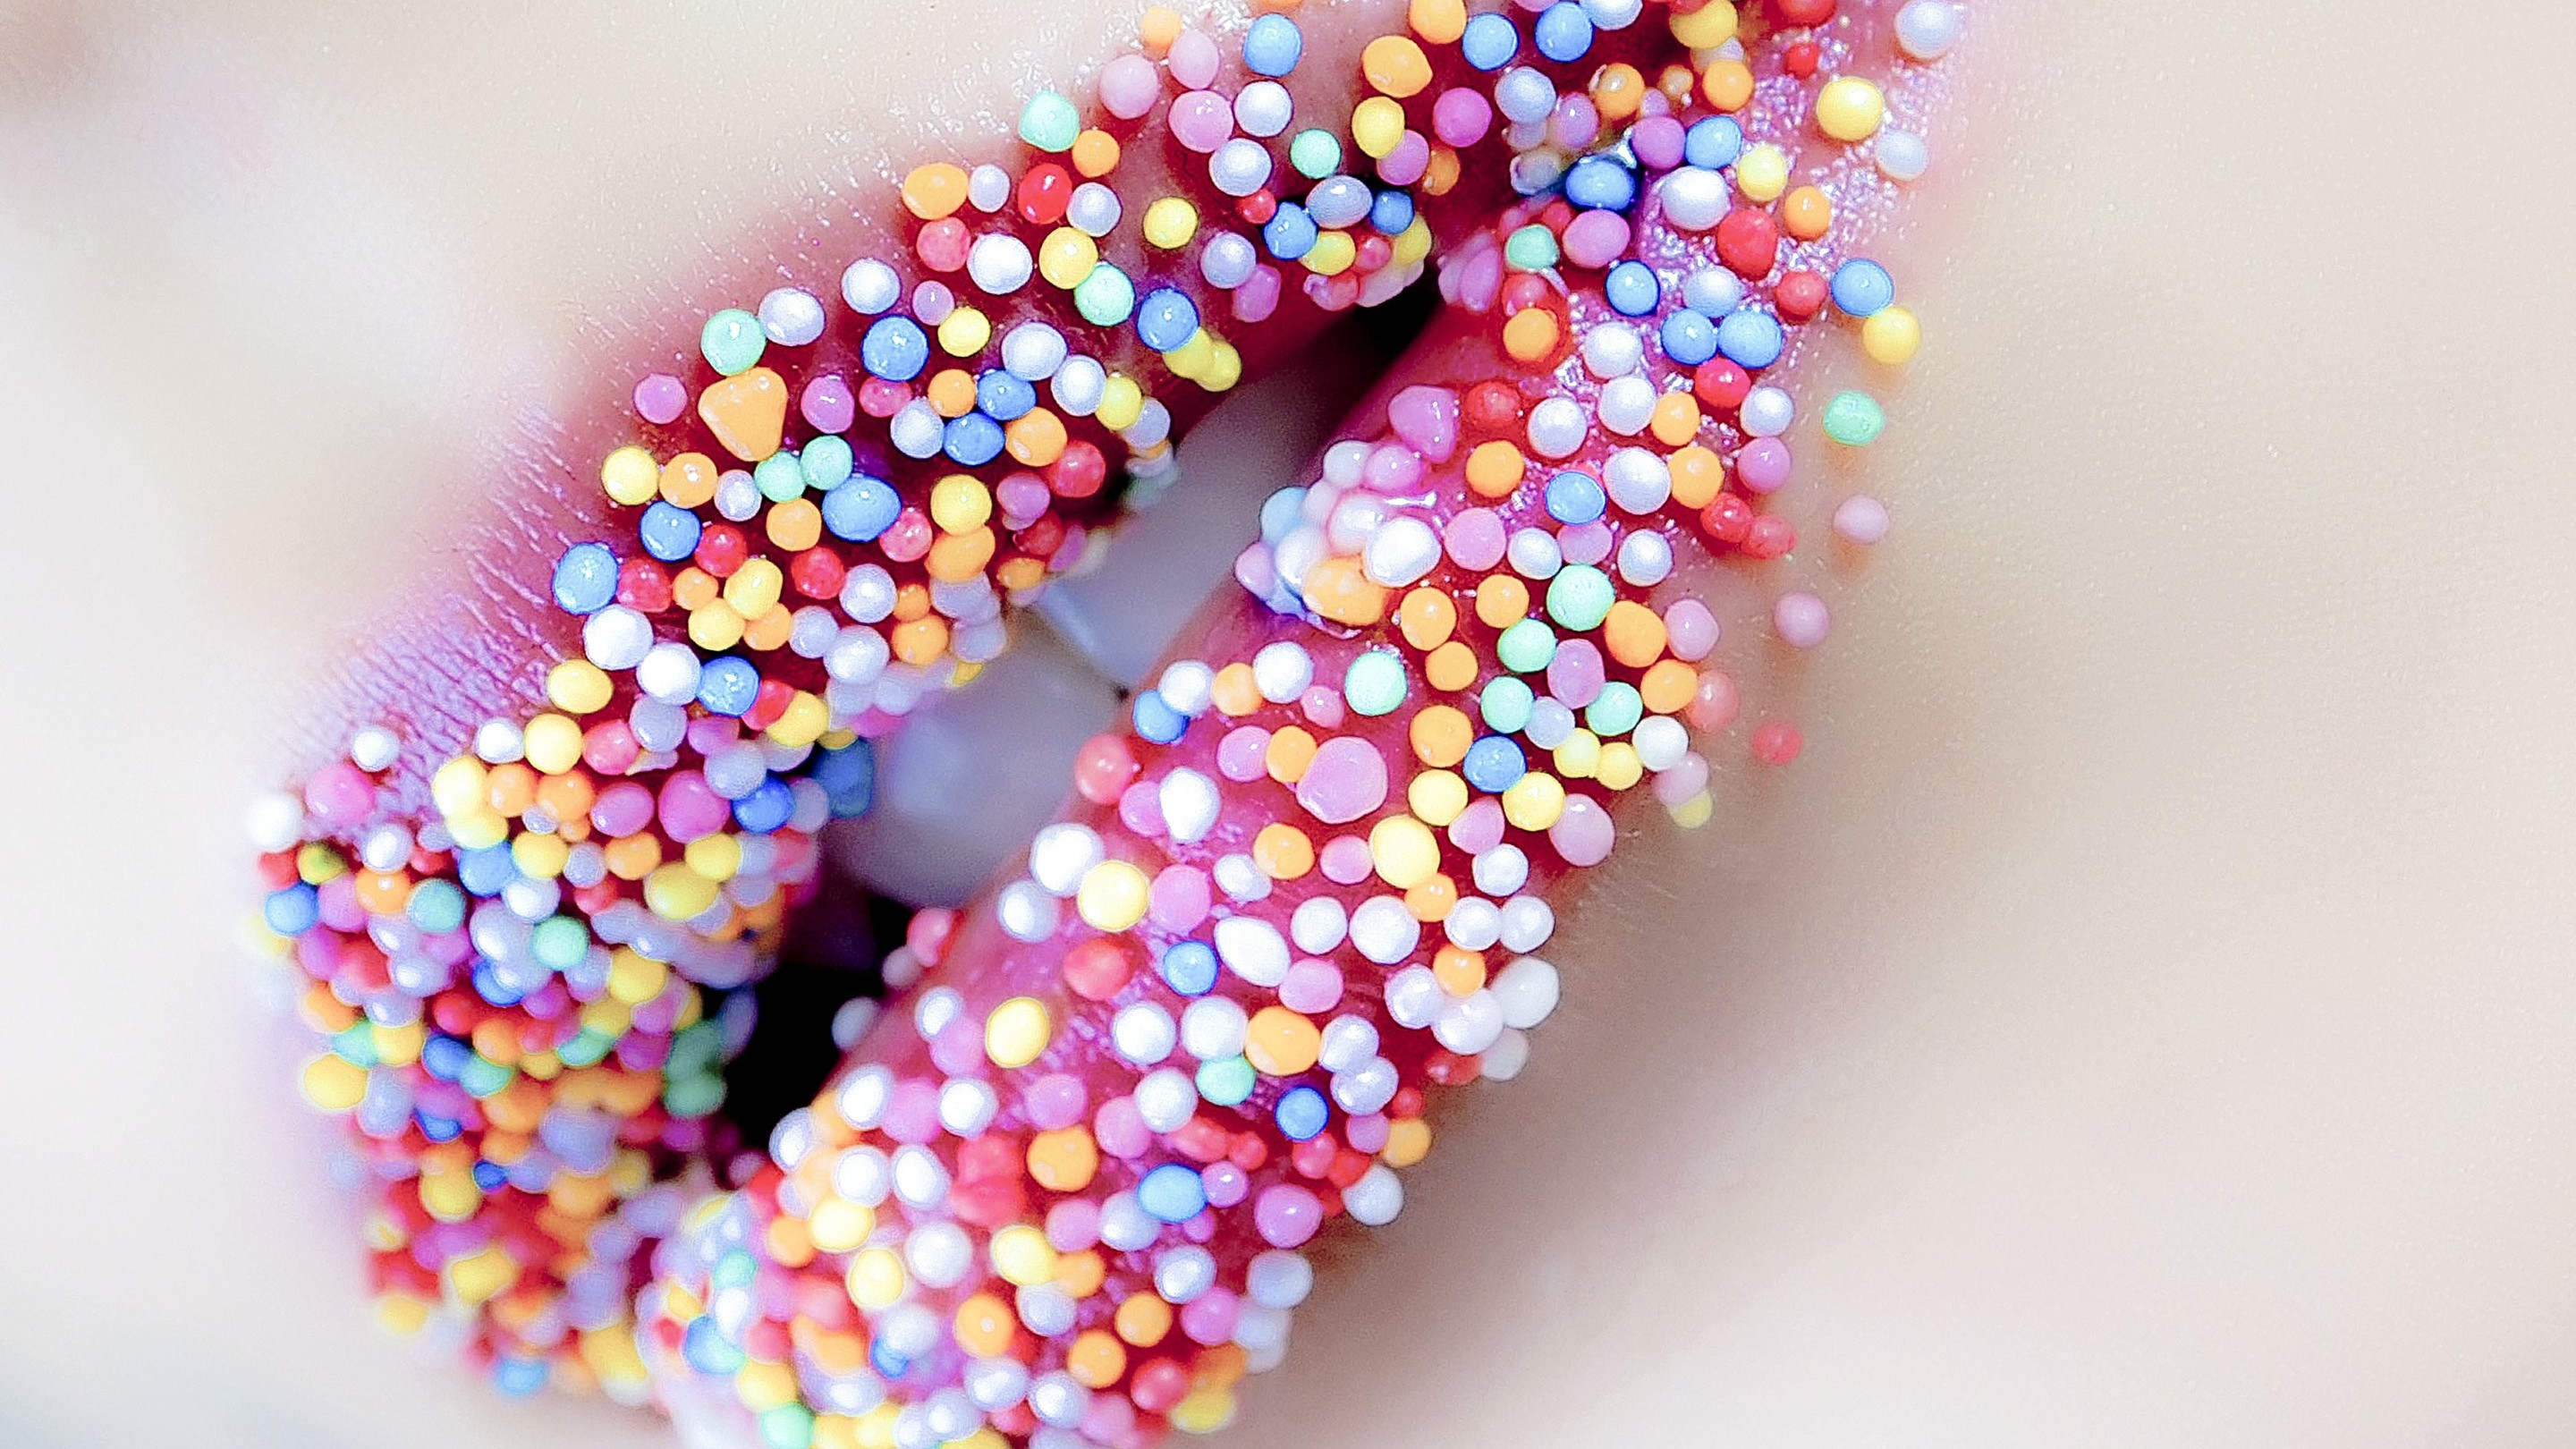 Lips with sweets wallpaper 2880x1620